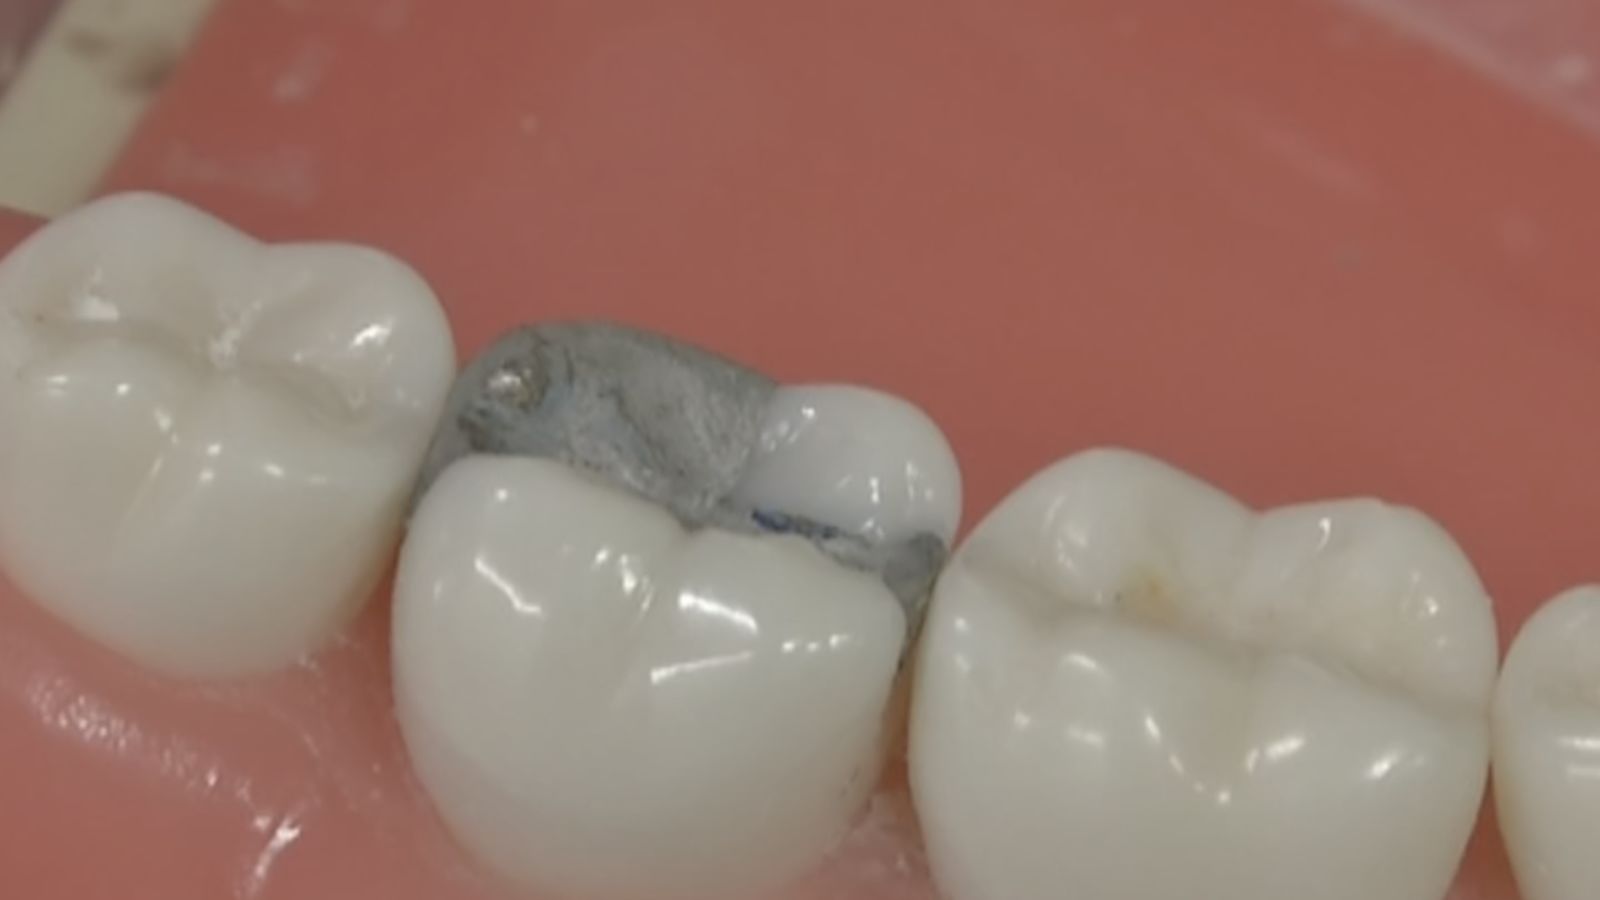 are dental fillings toxic? Here is an example of an amalgam filling in a model of the mouth